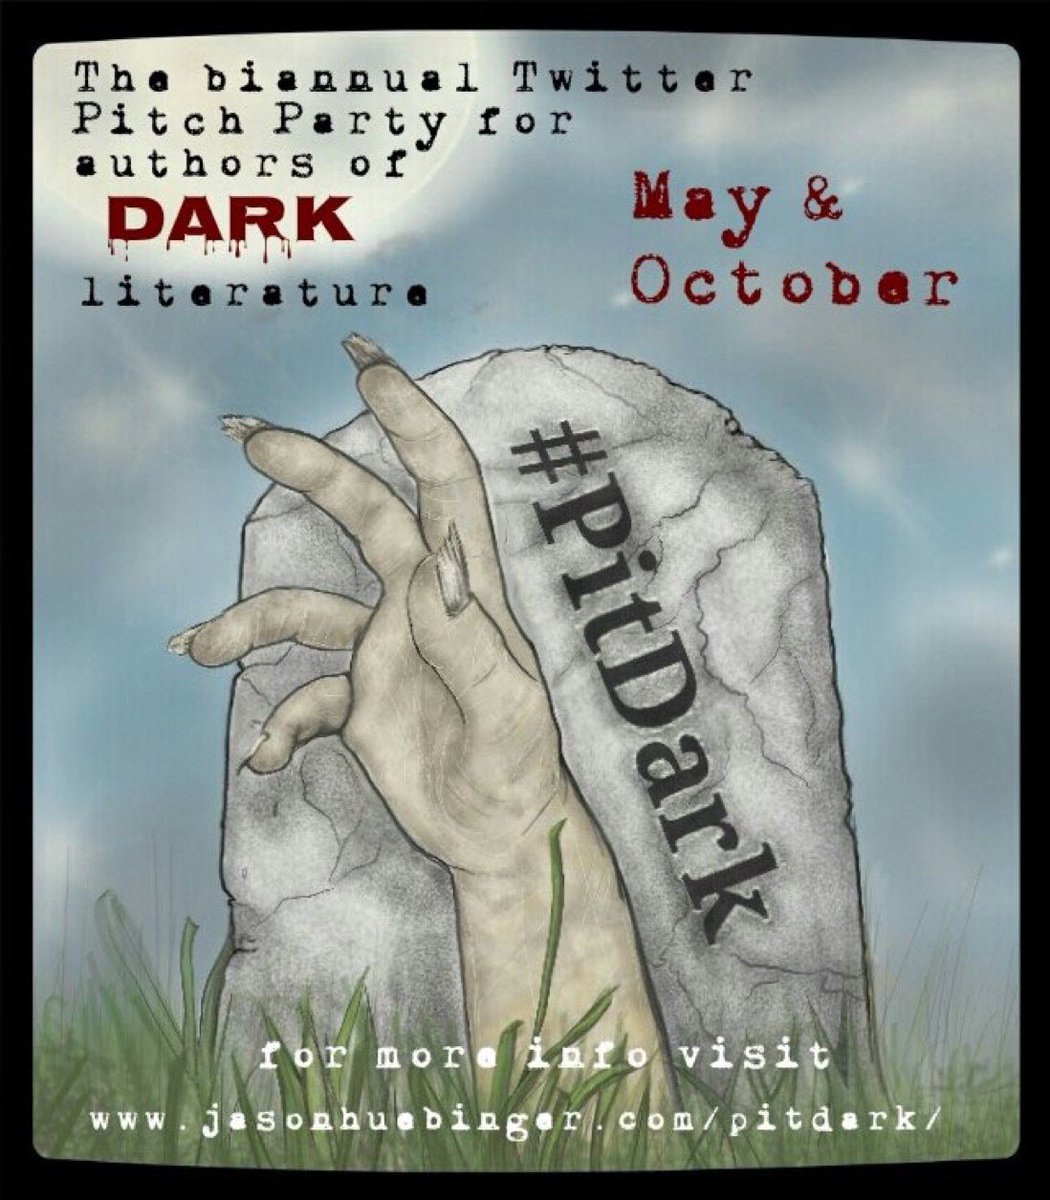 The next #PitDark, a pitch party for 'darker' literature, is October 26, 8 am - 8 pm ET. Please RT! Rules: jasonhuebinger.com/pitdark/ #amwriting #WritingCommunity